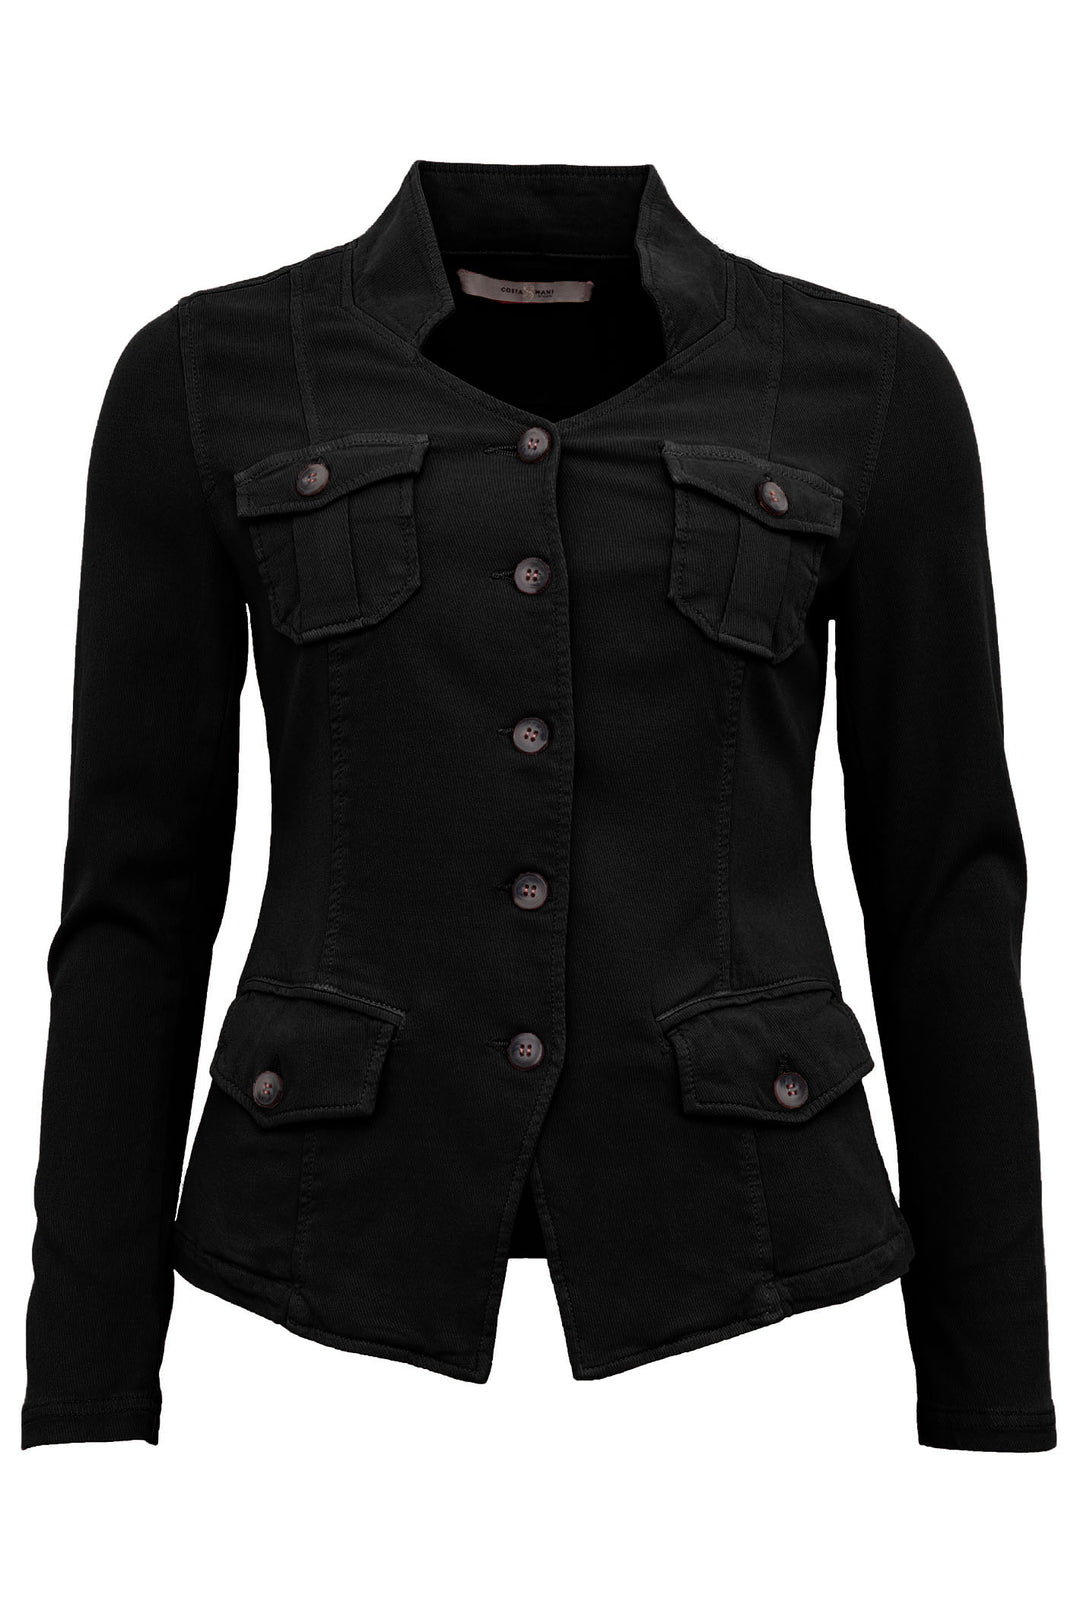 Costa Mani 2401908 Black Coss Stretch Jersey Jacket - Experience Boutique